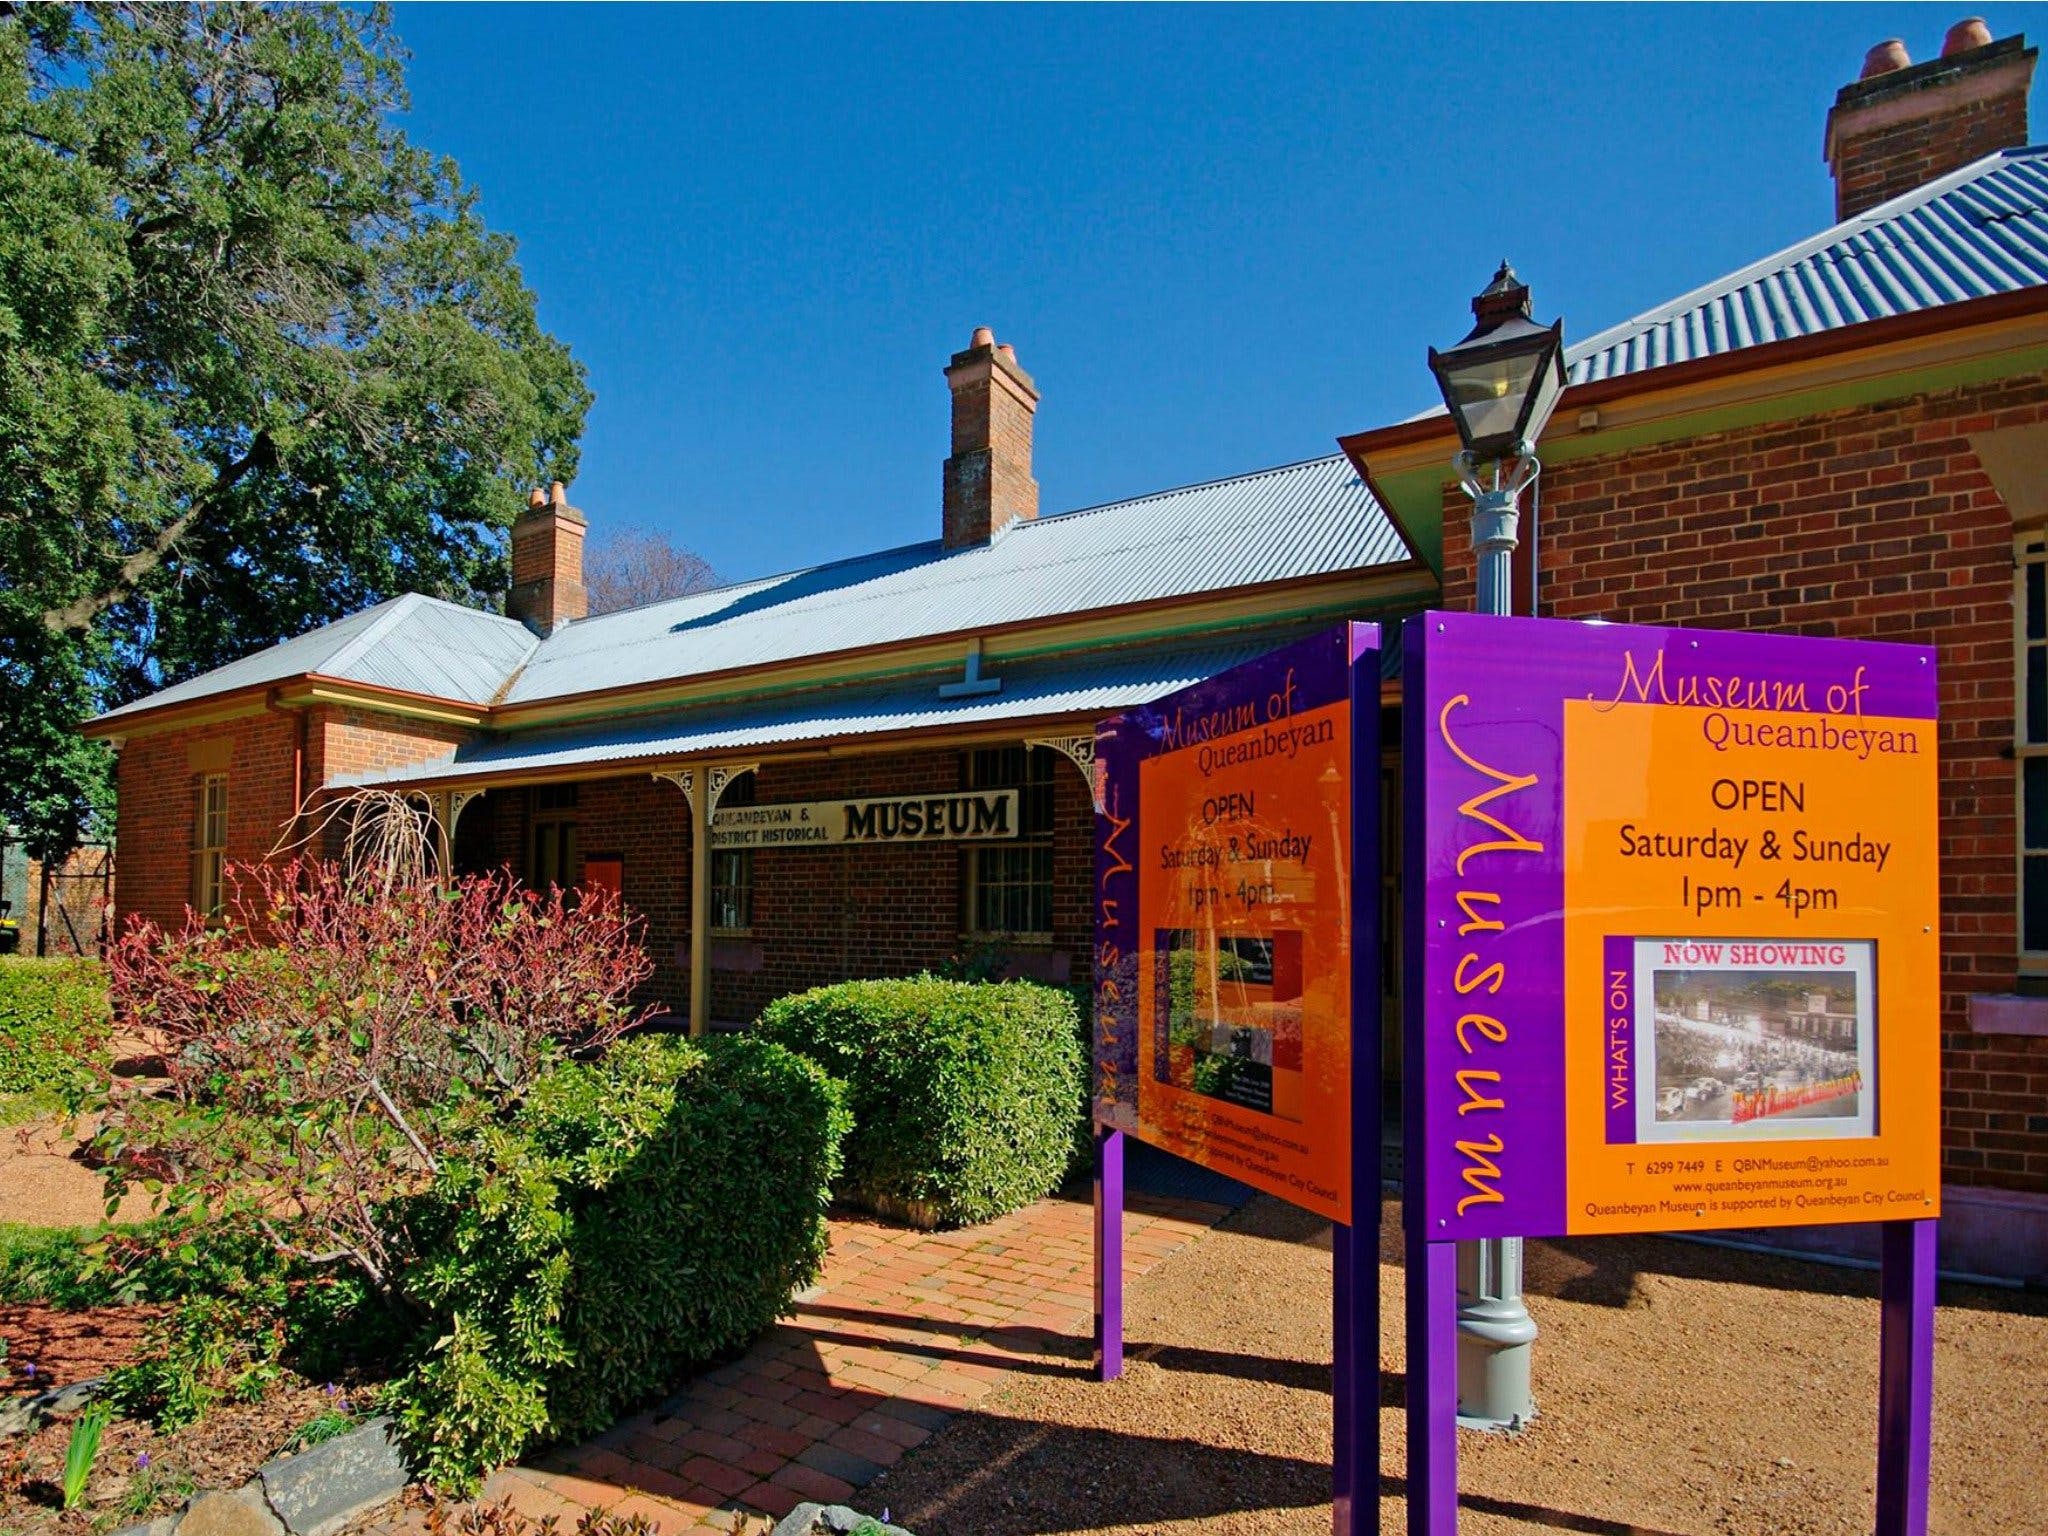 Queanbeyan Museum - Accommodation NT